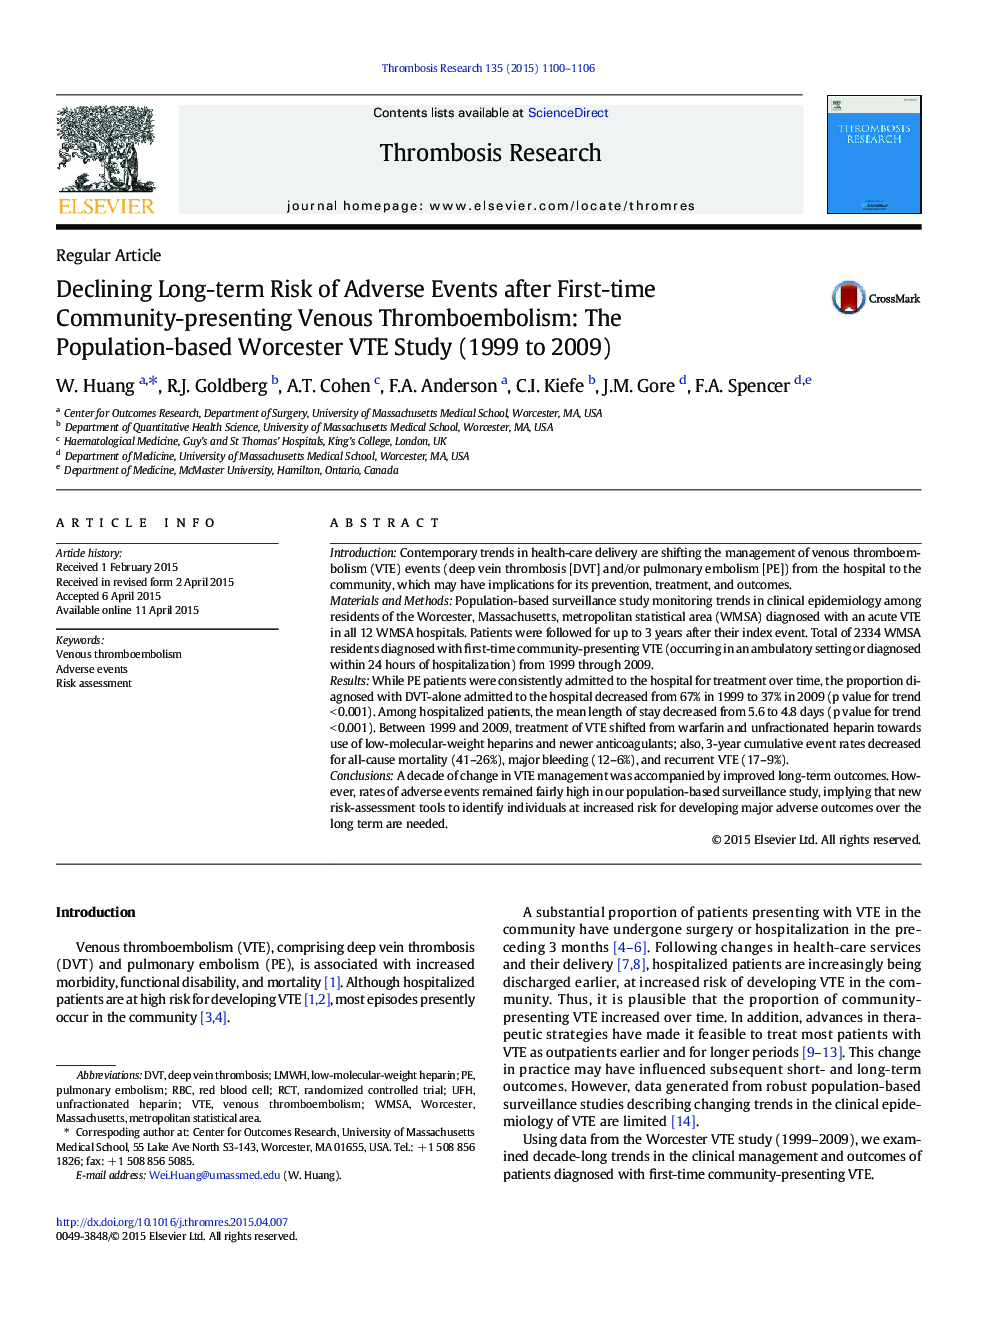 Declining Long-term Risk of Adverse Events after First-time Community-presenting Venous Thromboembolism: The Population-based Worcester VTE Study (1999 to 2009)